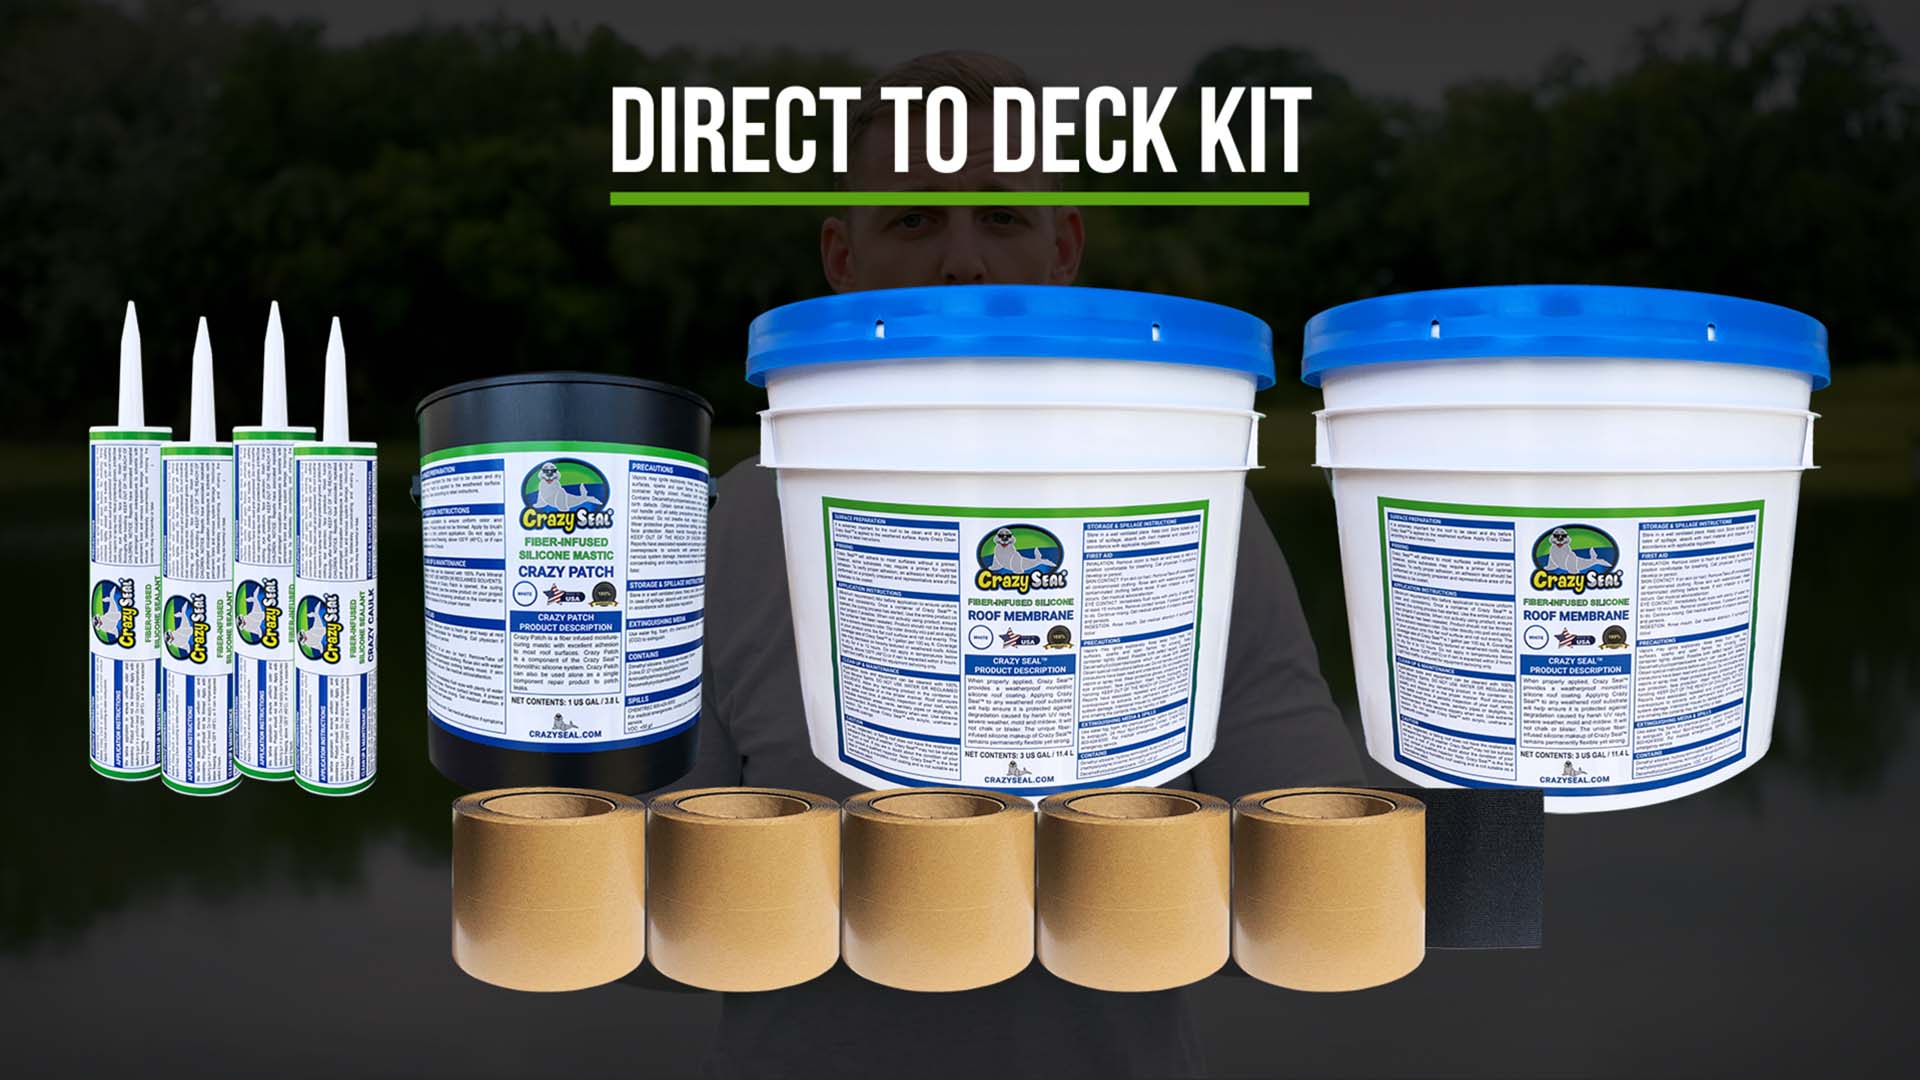 DIRECT TO DECK KIT